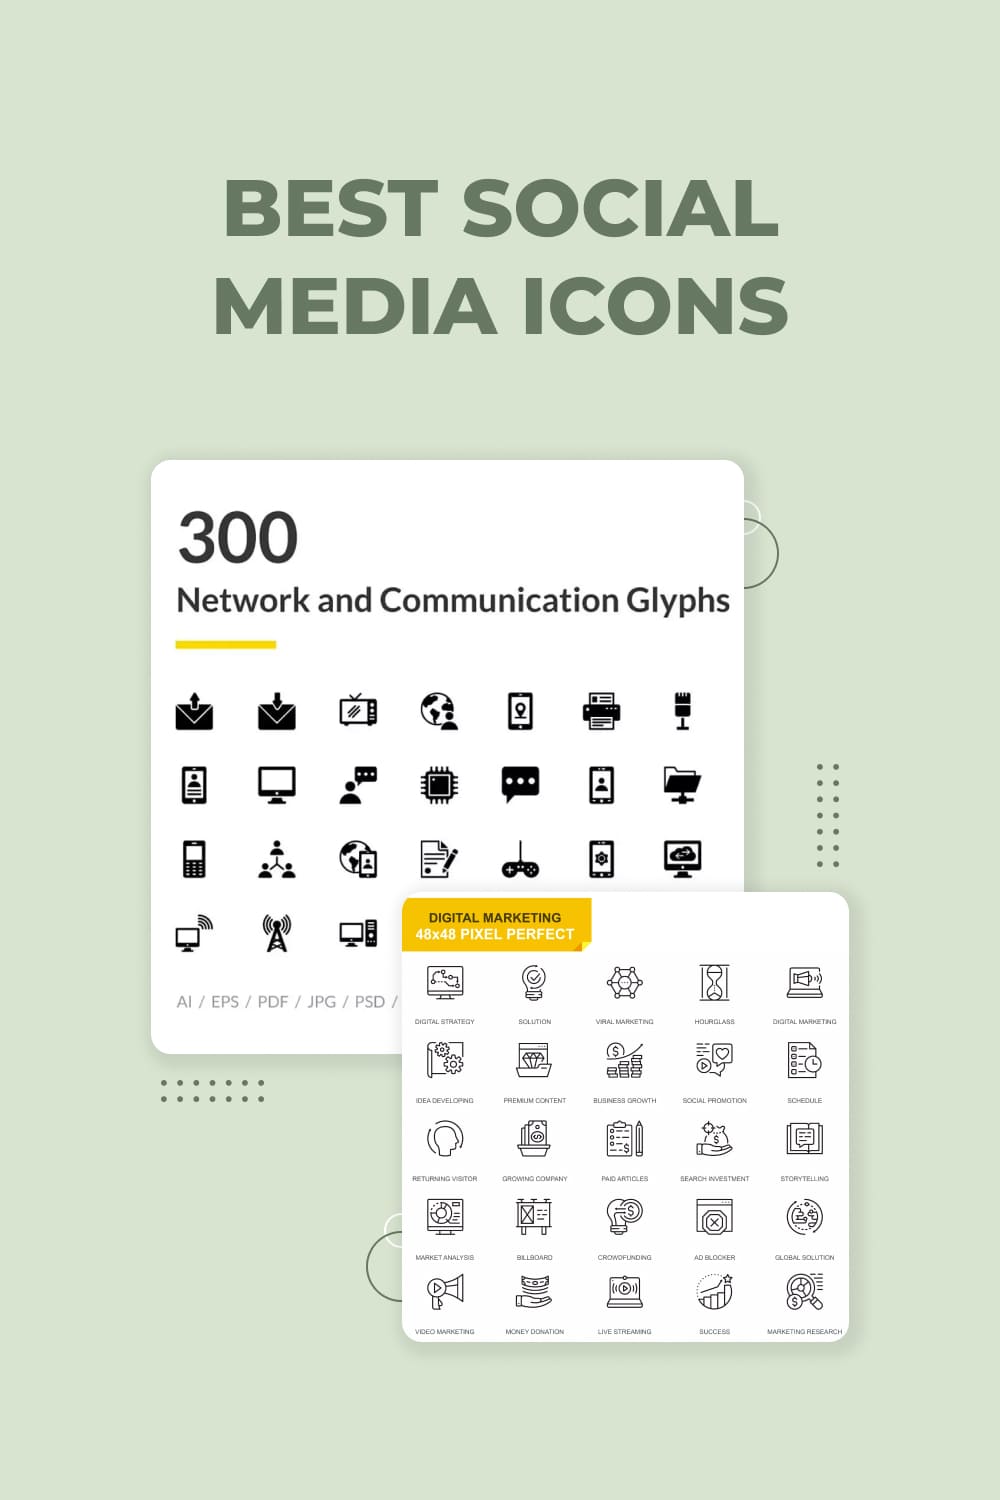 The cover of the book best social media icons.